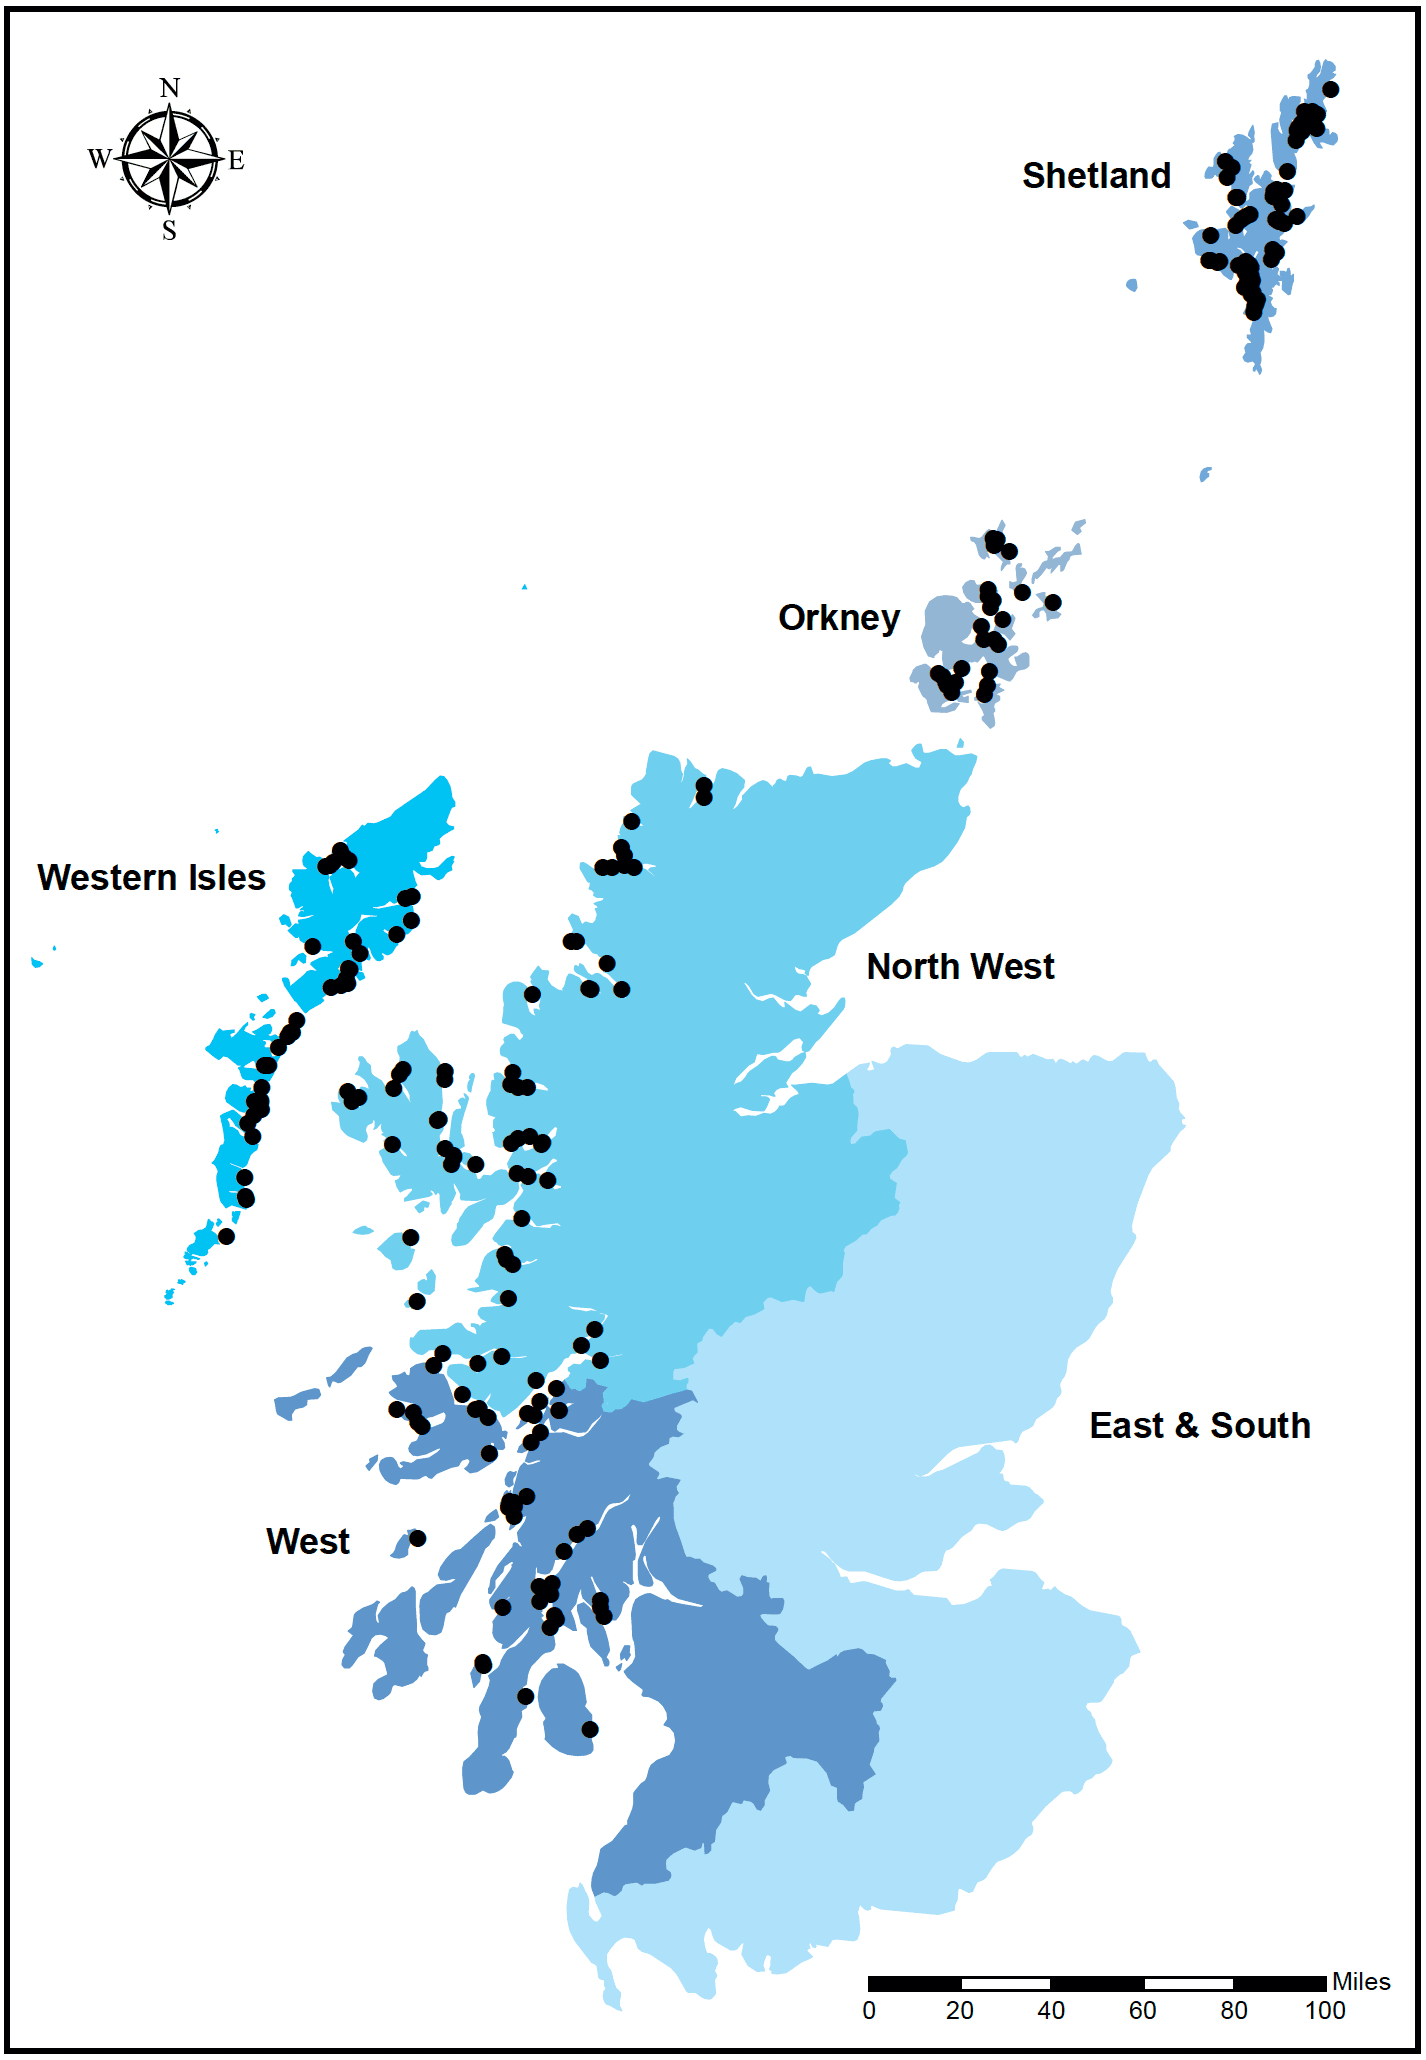 This is a map showing the distribution of active Atlantic salmon production sites in Scotland in 2020. The map is split into 6 areas: Shetland, Orkney, North West, East & South, West and Western Isles and has black dots showing where each site is on the map.